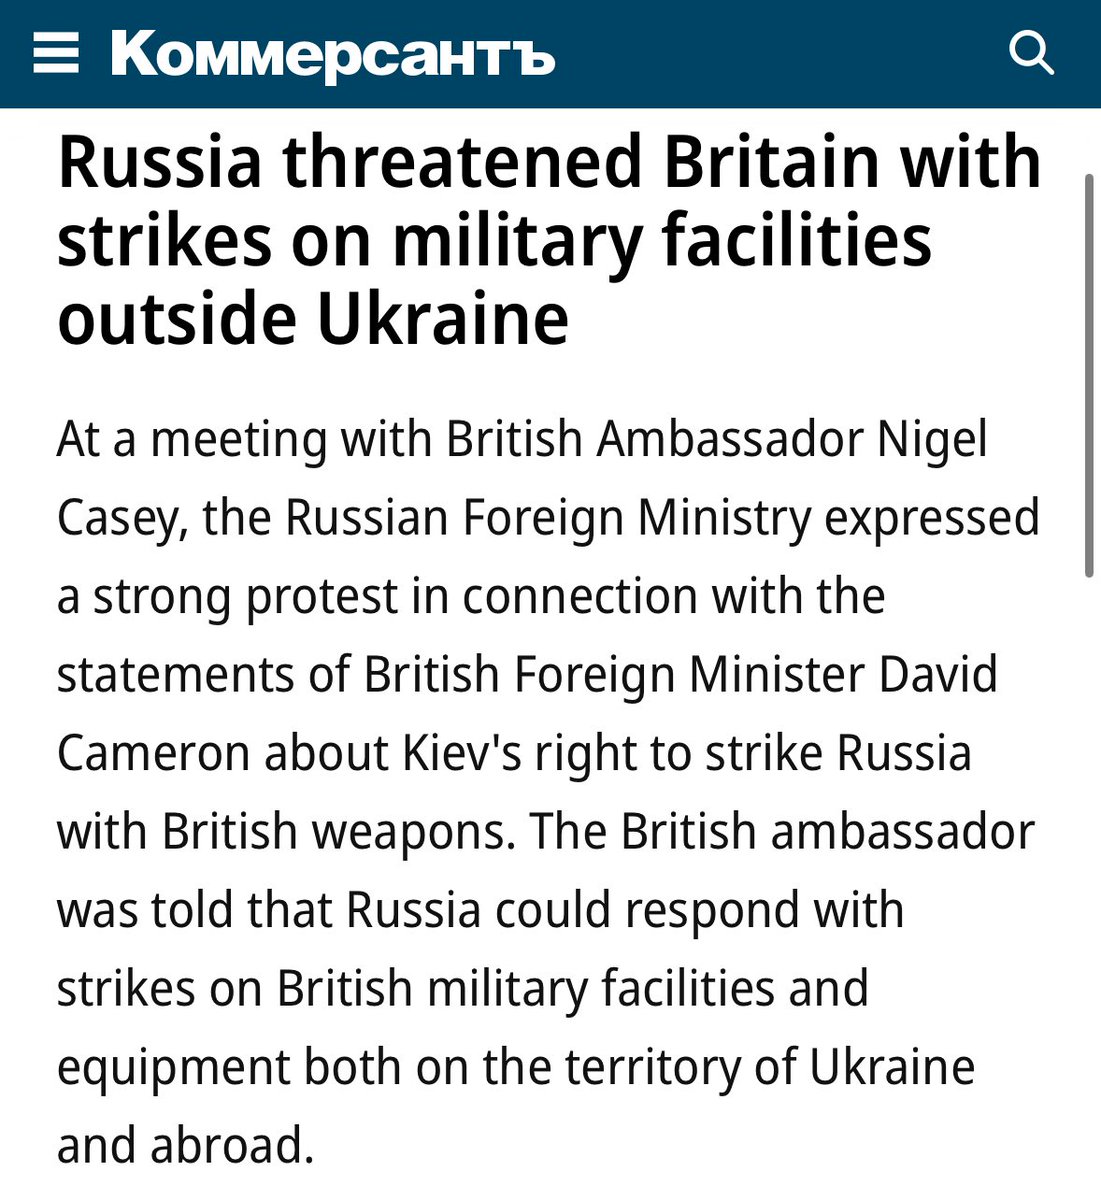 Russian MFA: Any UK military sites in Ukraine or elsewhere could face retaliation if Ukraine uses British weapons in Russia. Seriously? What about all those Russian terrorist attacks and sabotage across Europe? Or do they just not count?